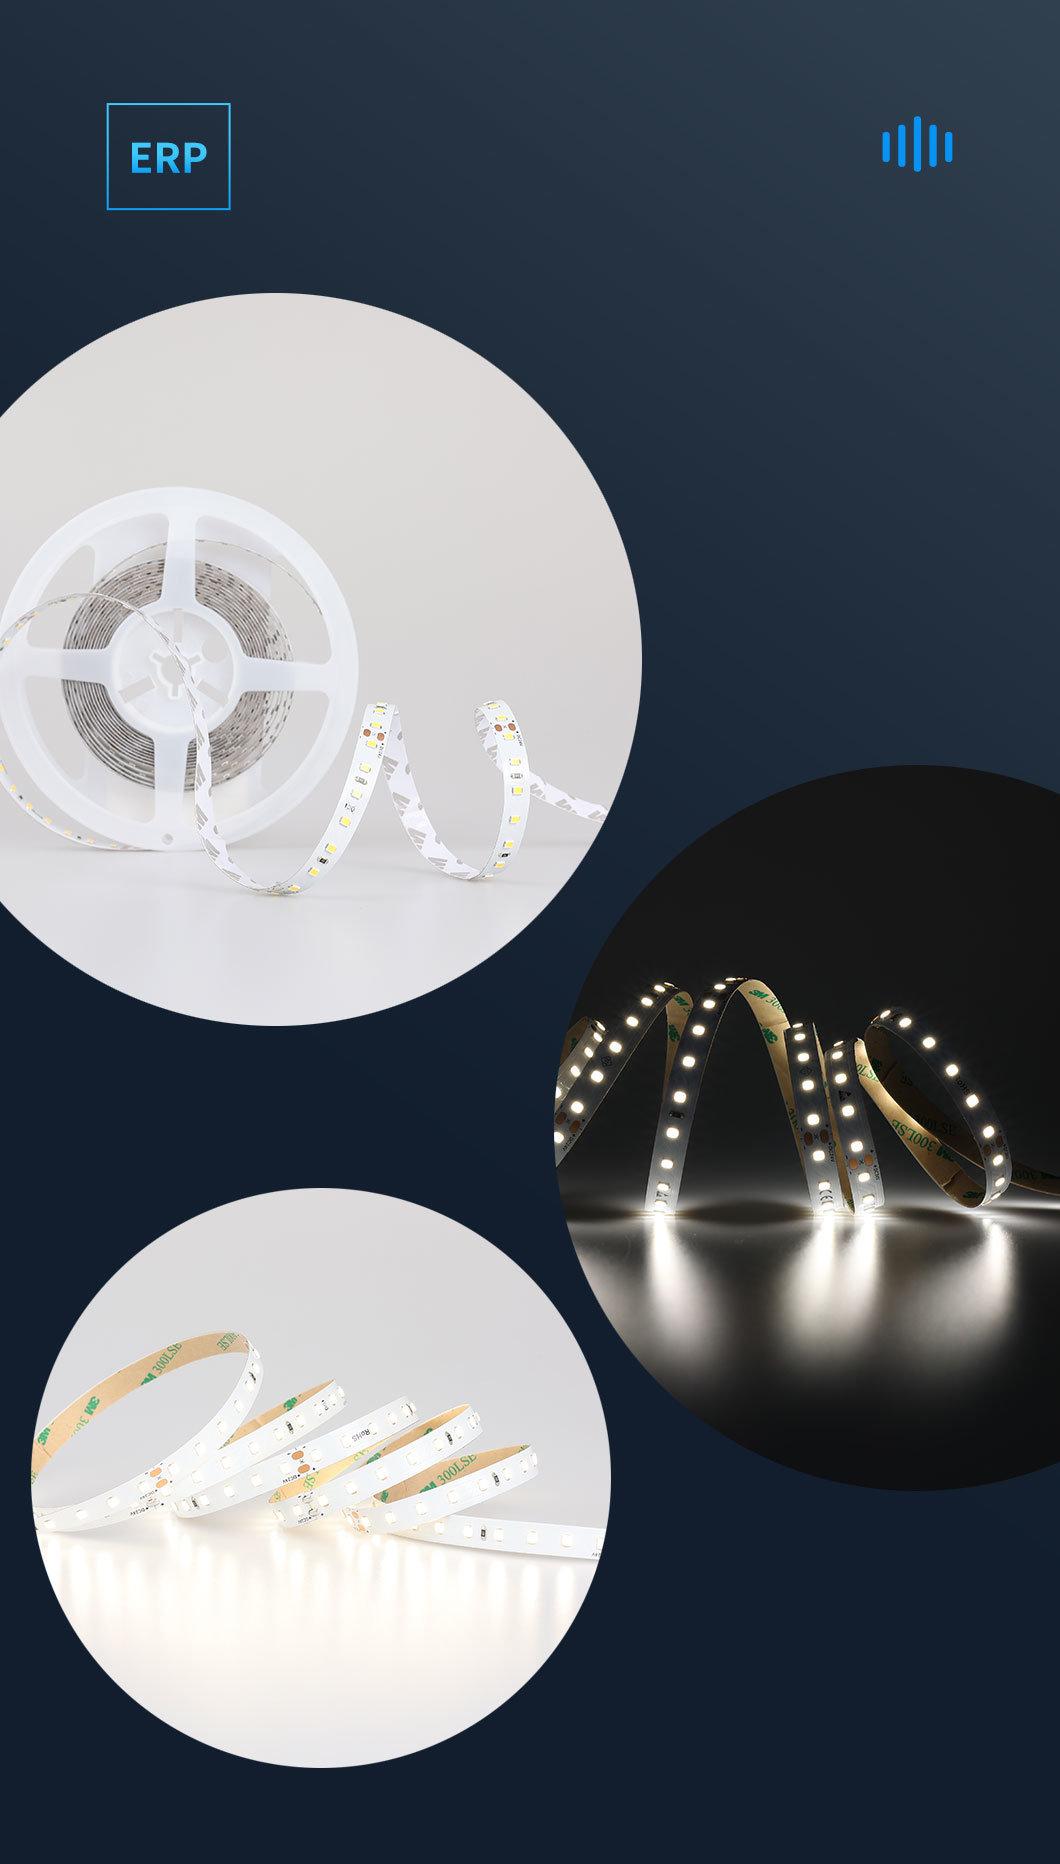 High CRI80 3000K 10mm 5m Constant Voltage LED Light Strip with ERP Approval